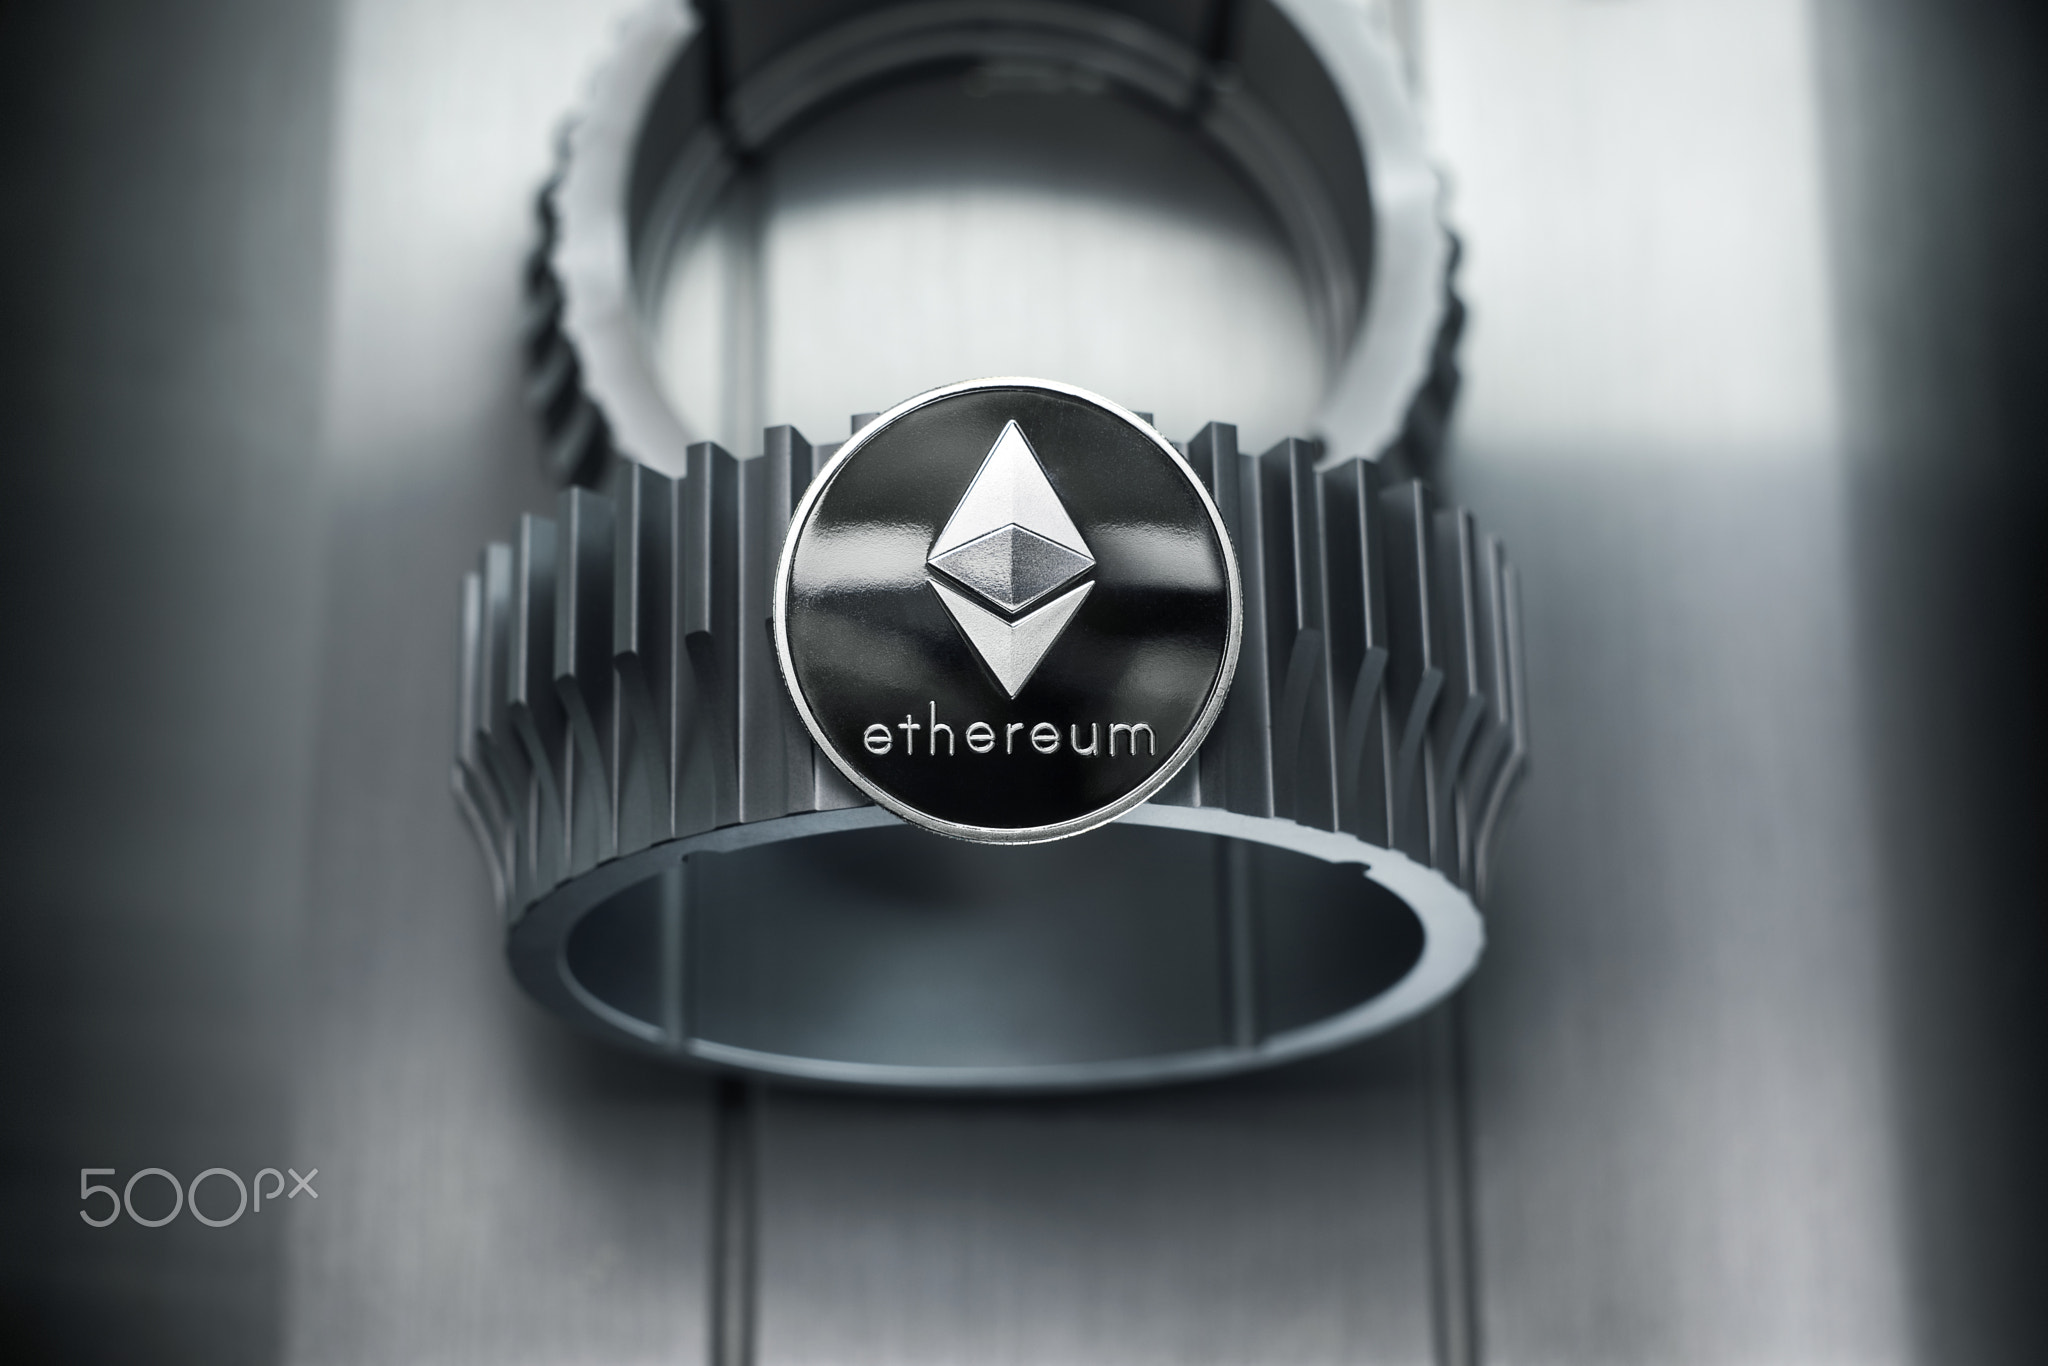 Ethereum silver coin